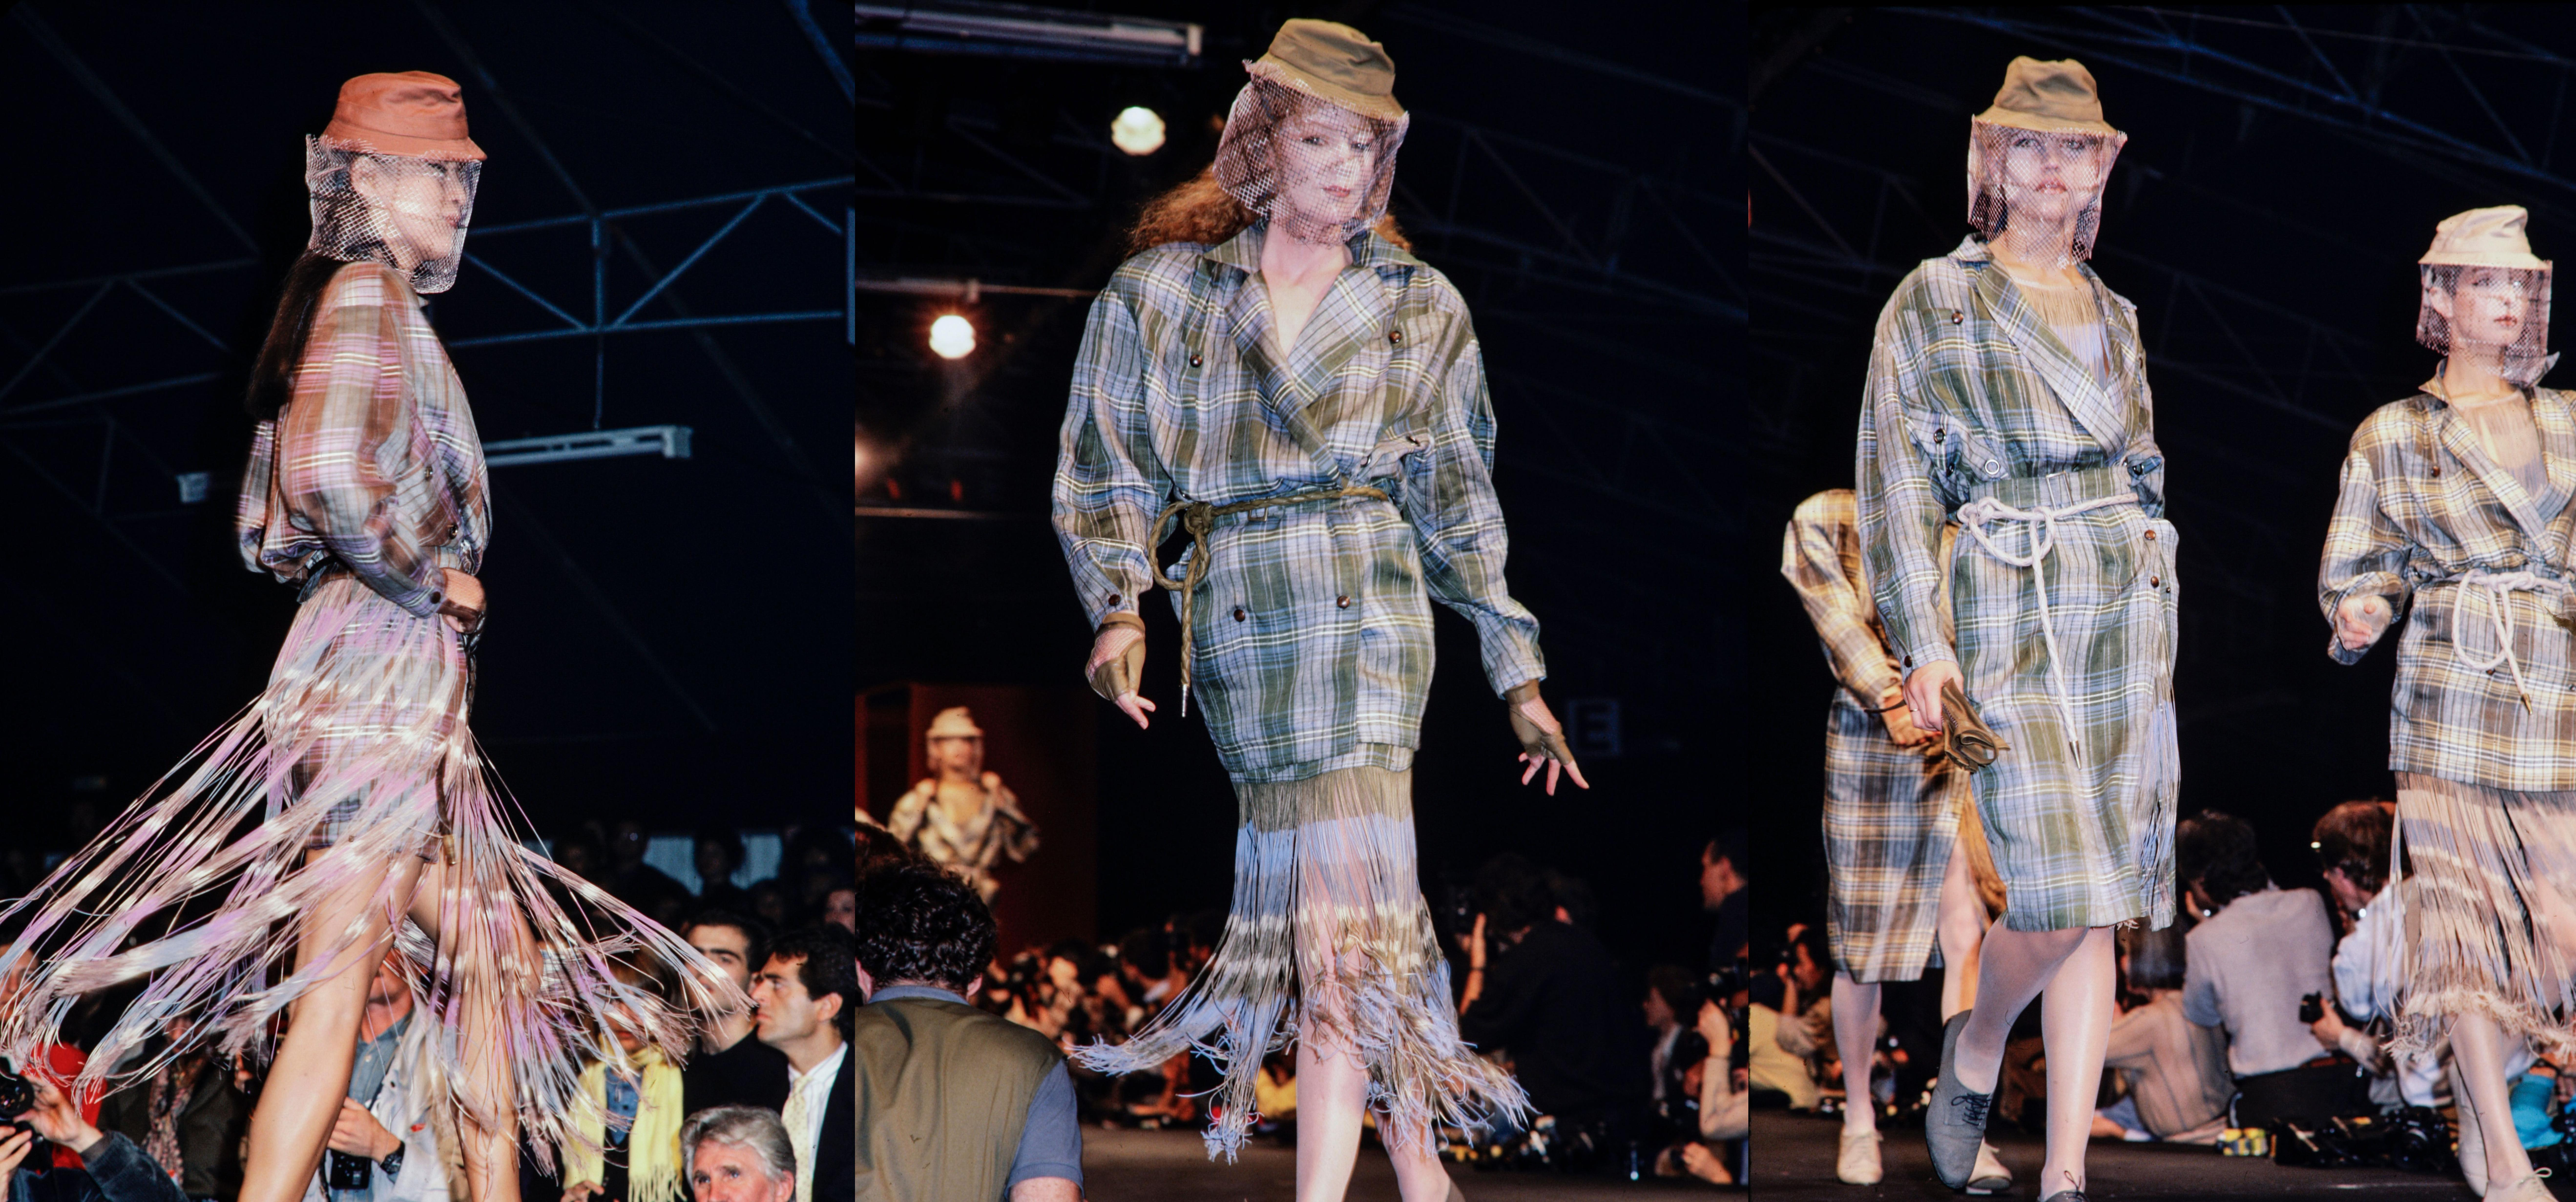 Thierry Mugler checked purple lined skirt suit.

- Doubled breasted oversized blazed jacket with snap buttons and matching belt
- Mini skirt with long fringed trim 

Spring-Summer 1985